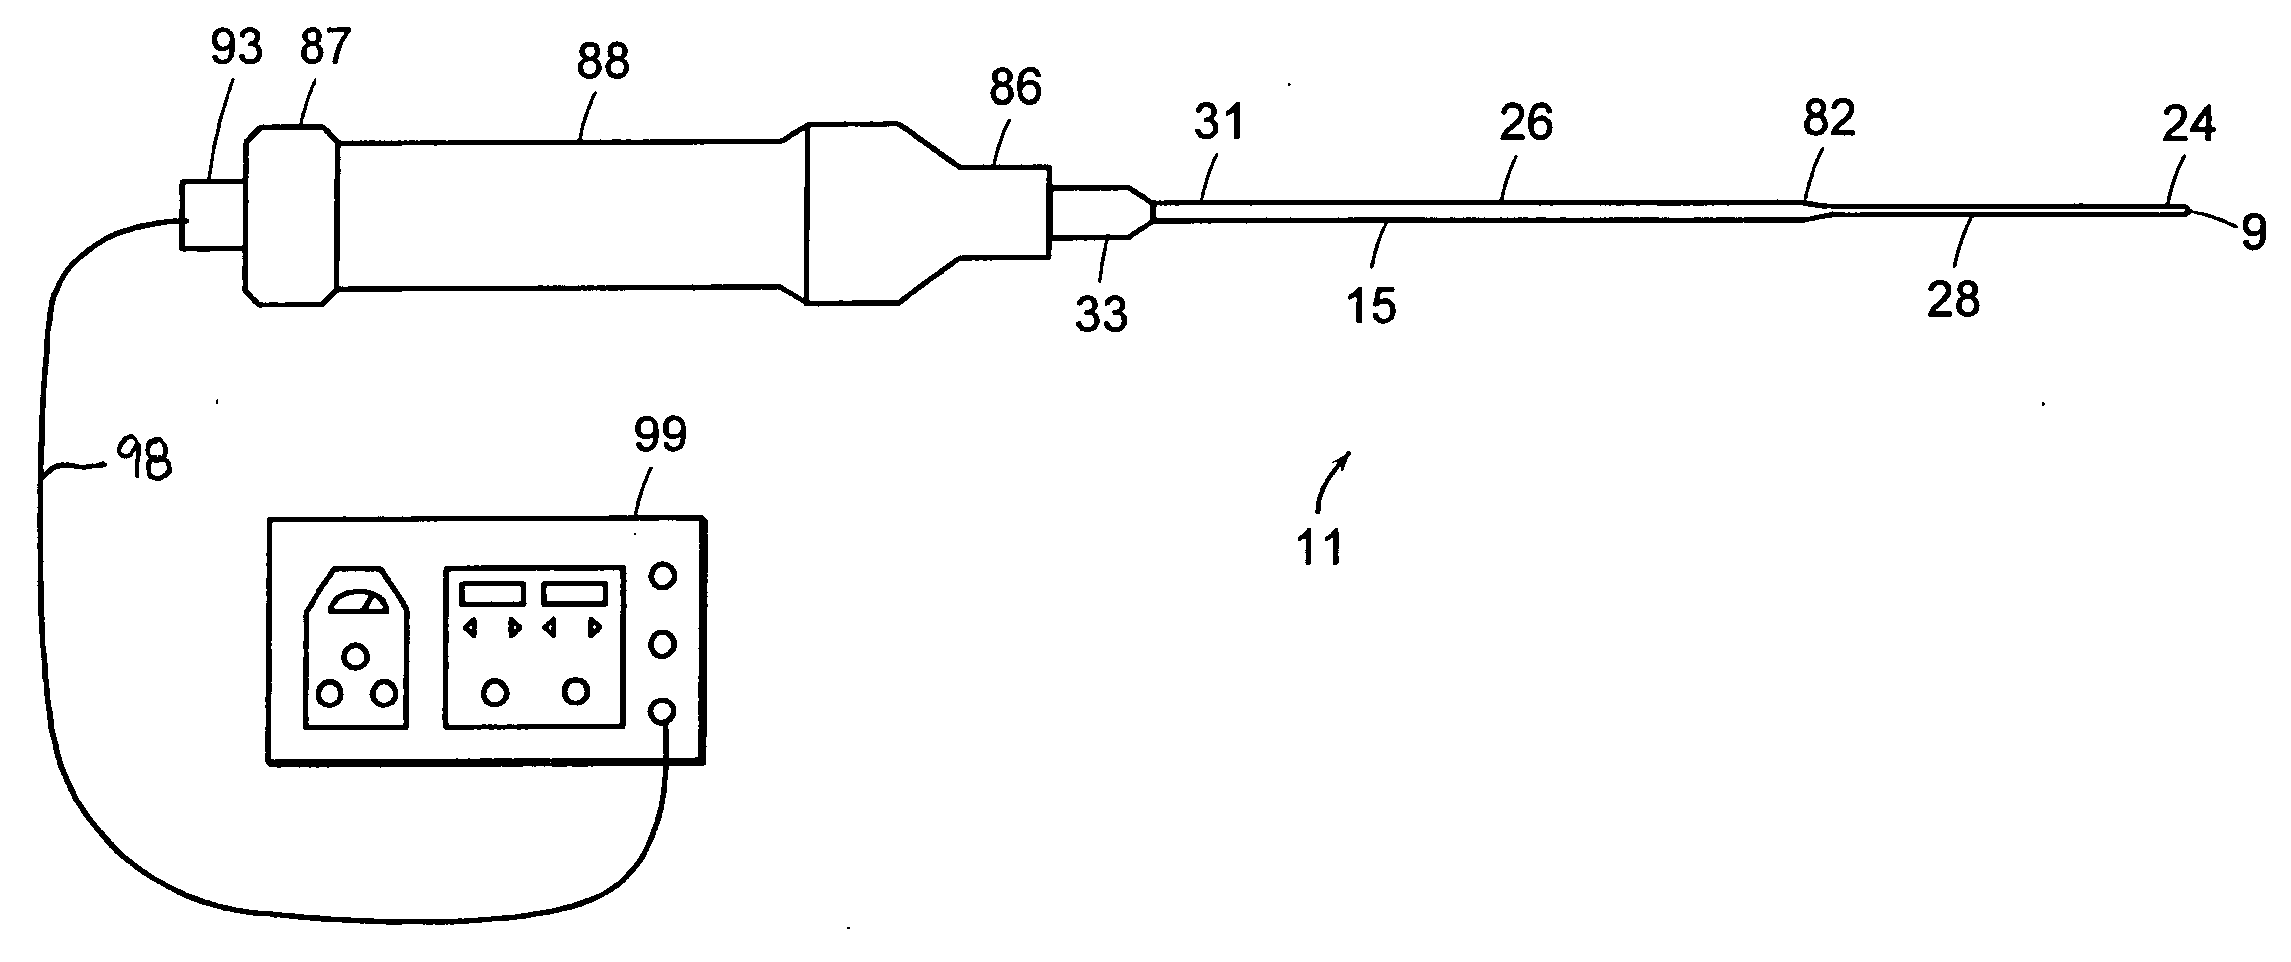 Apparatus and method for an ultrasonic medical device having a probe with a small proximal end